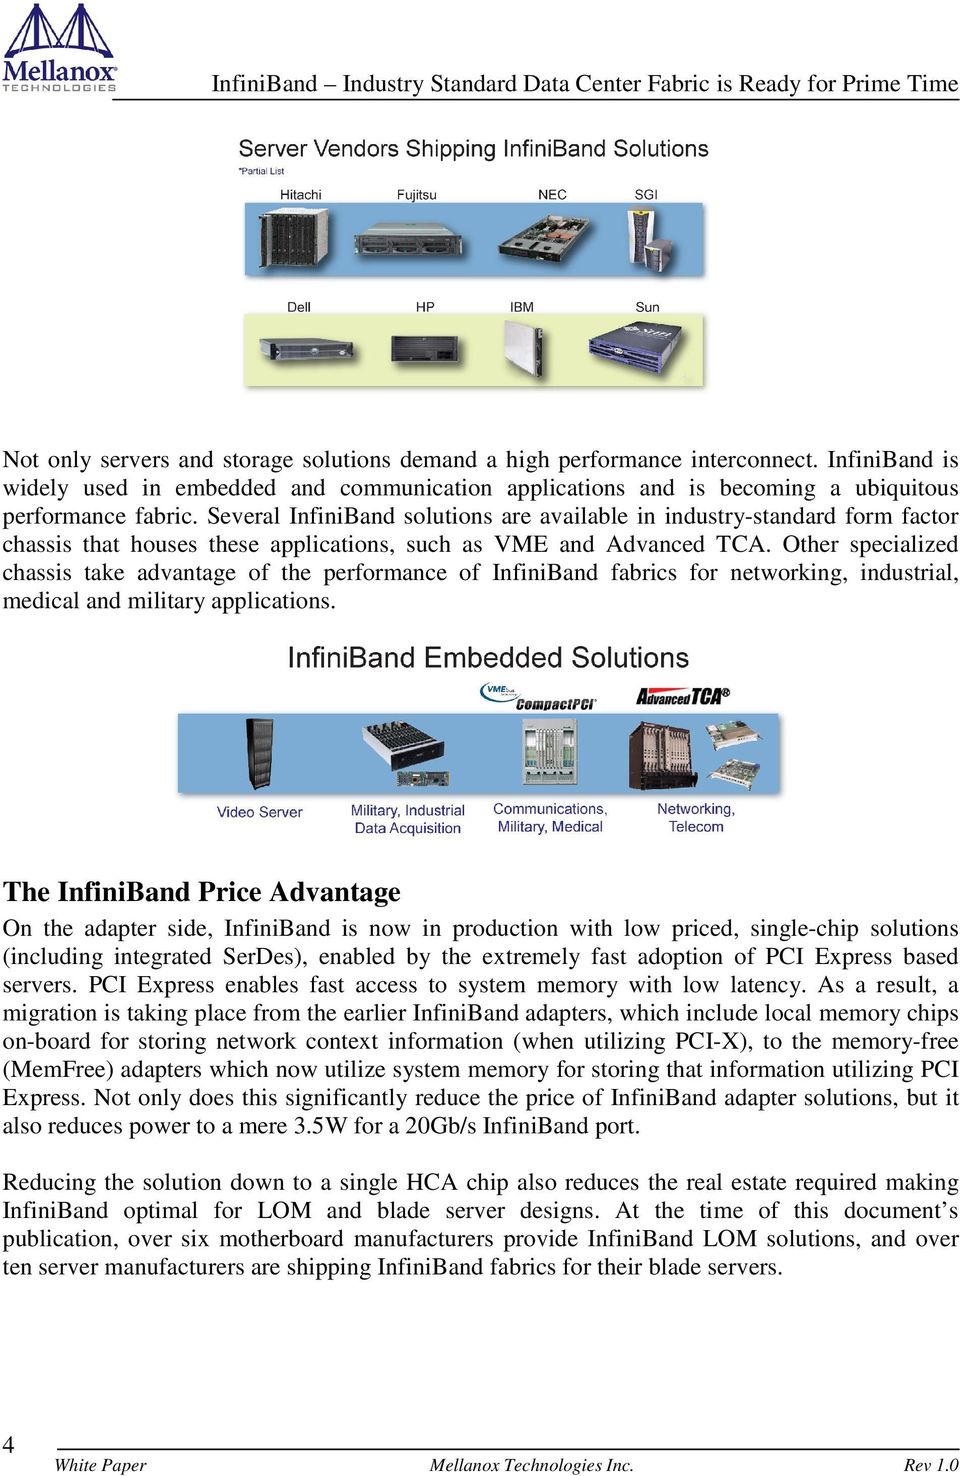 Other specialized chassis take advantage of the performance of InfiniBand fabrics for networking, industrial, medical and military applications.